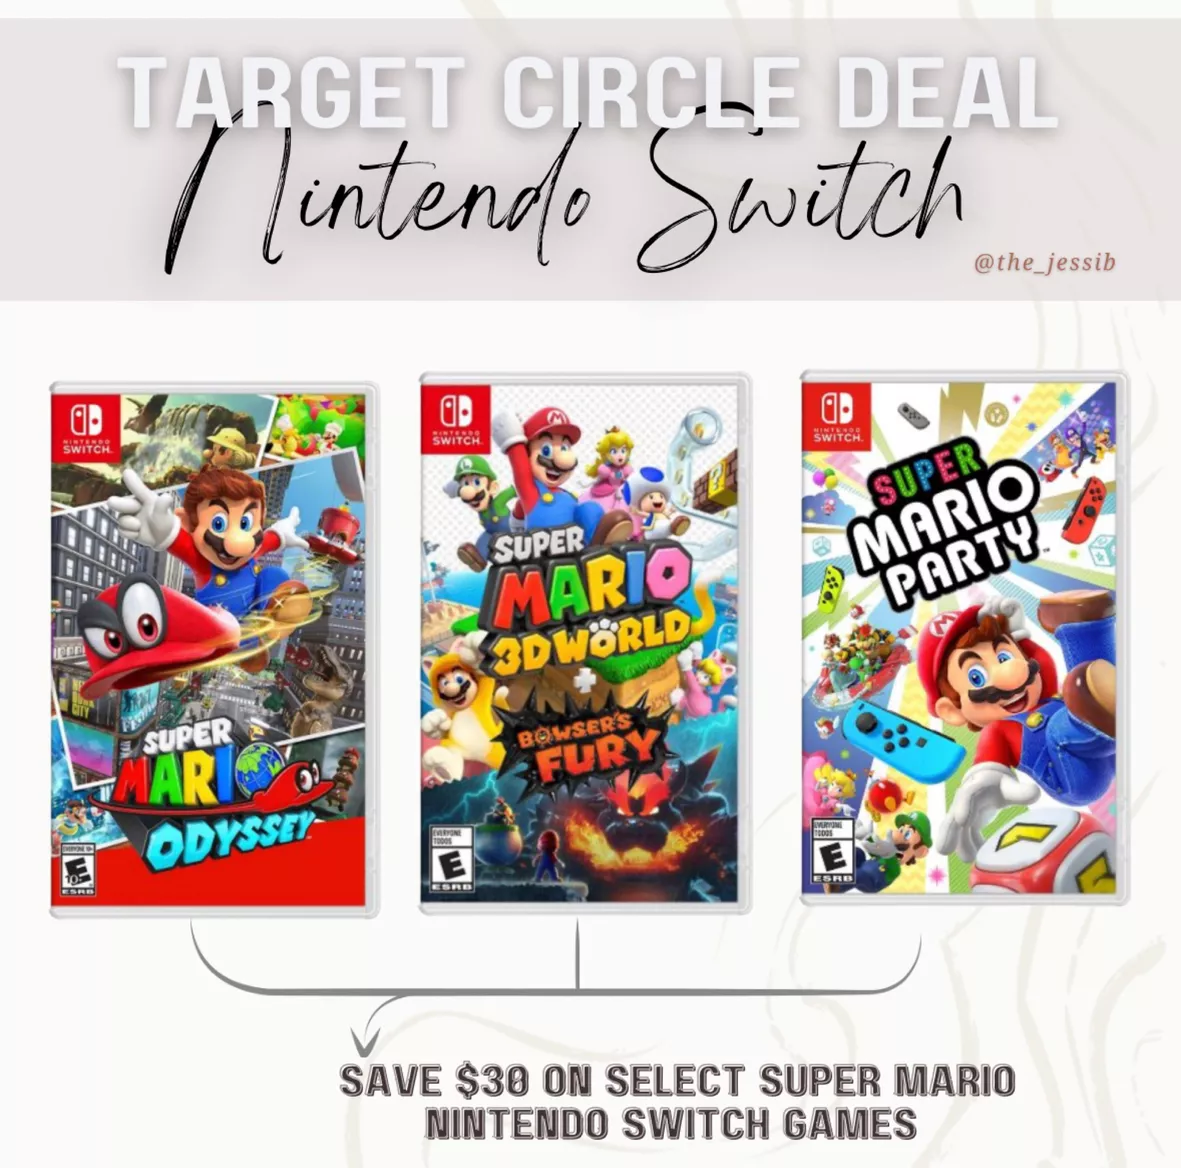 Mario Nintendo Switch games on sale: Save up to $30